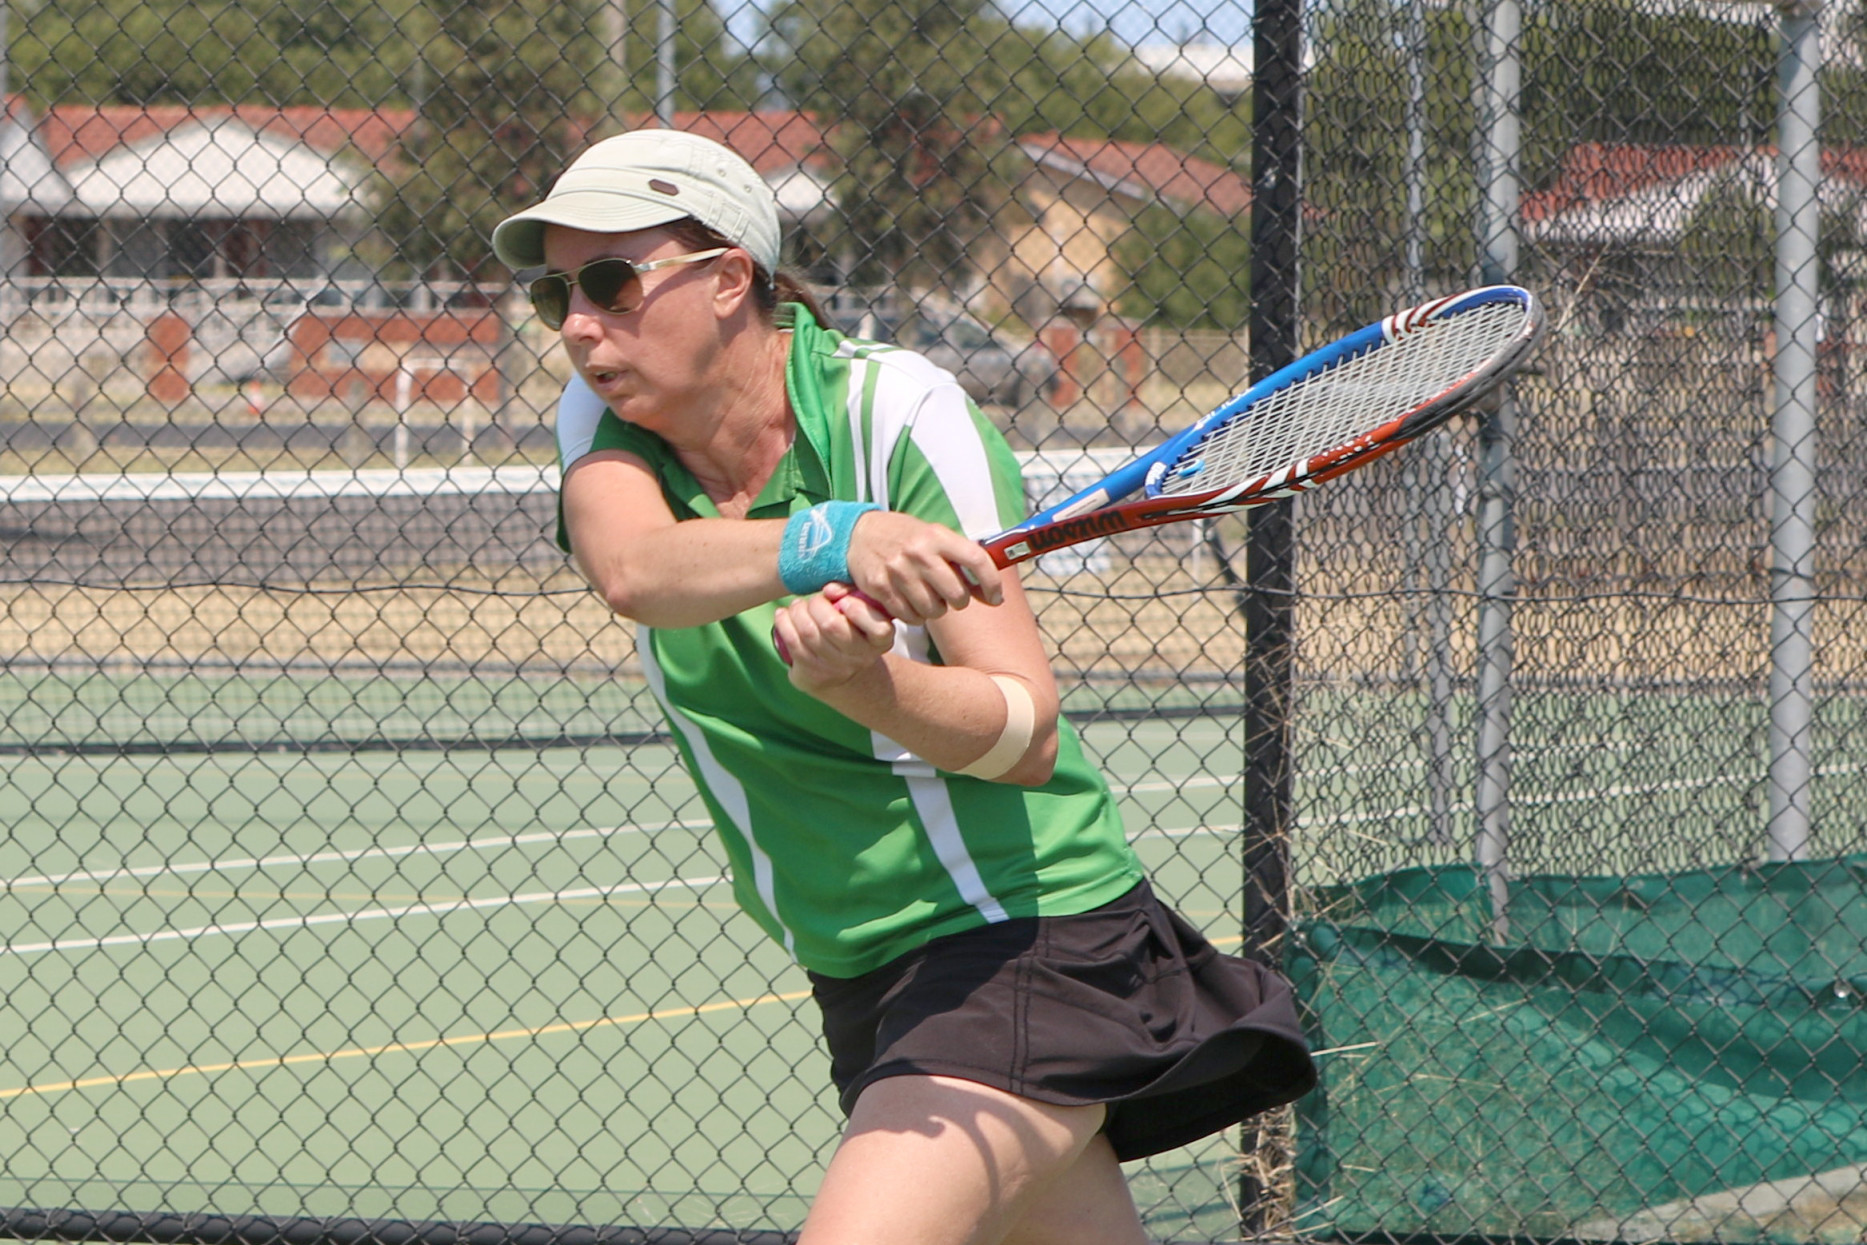 Horsham Lawn's Cherie Wood has a 13-2 record in singles and a 21-10 record in doubles this season. She is unbeaten in singles in 2024.